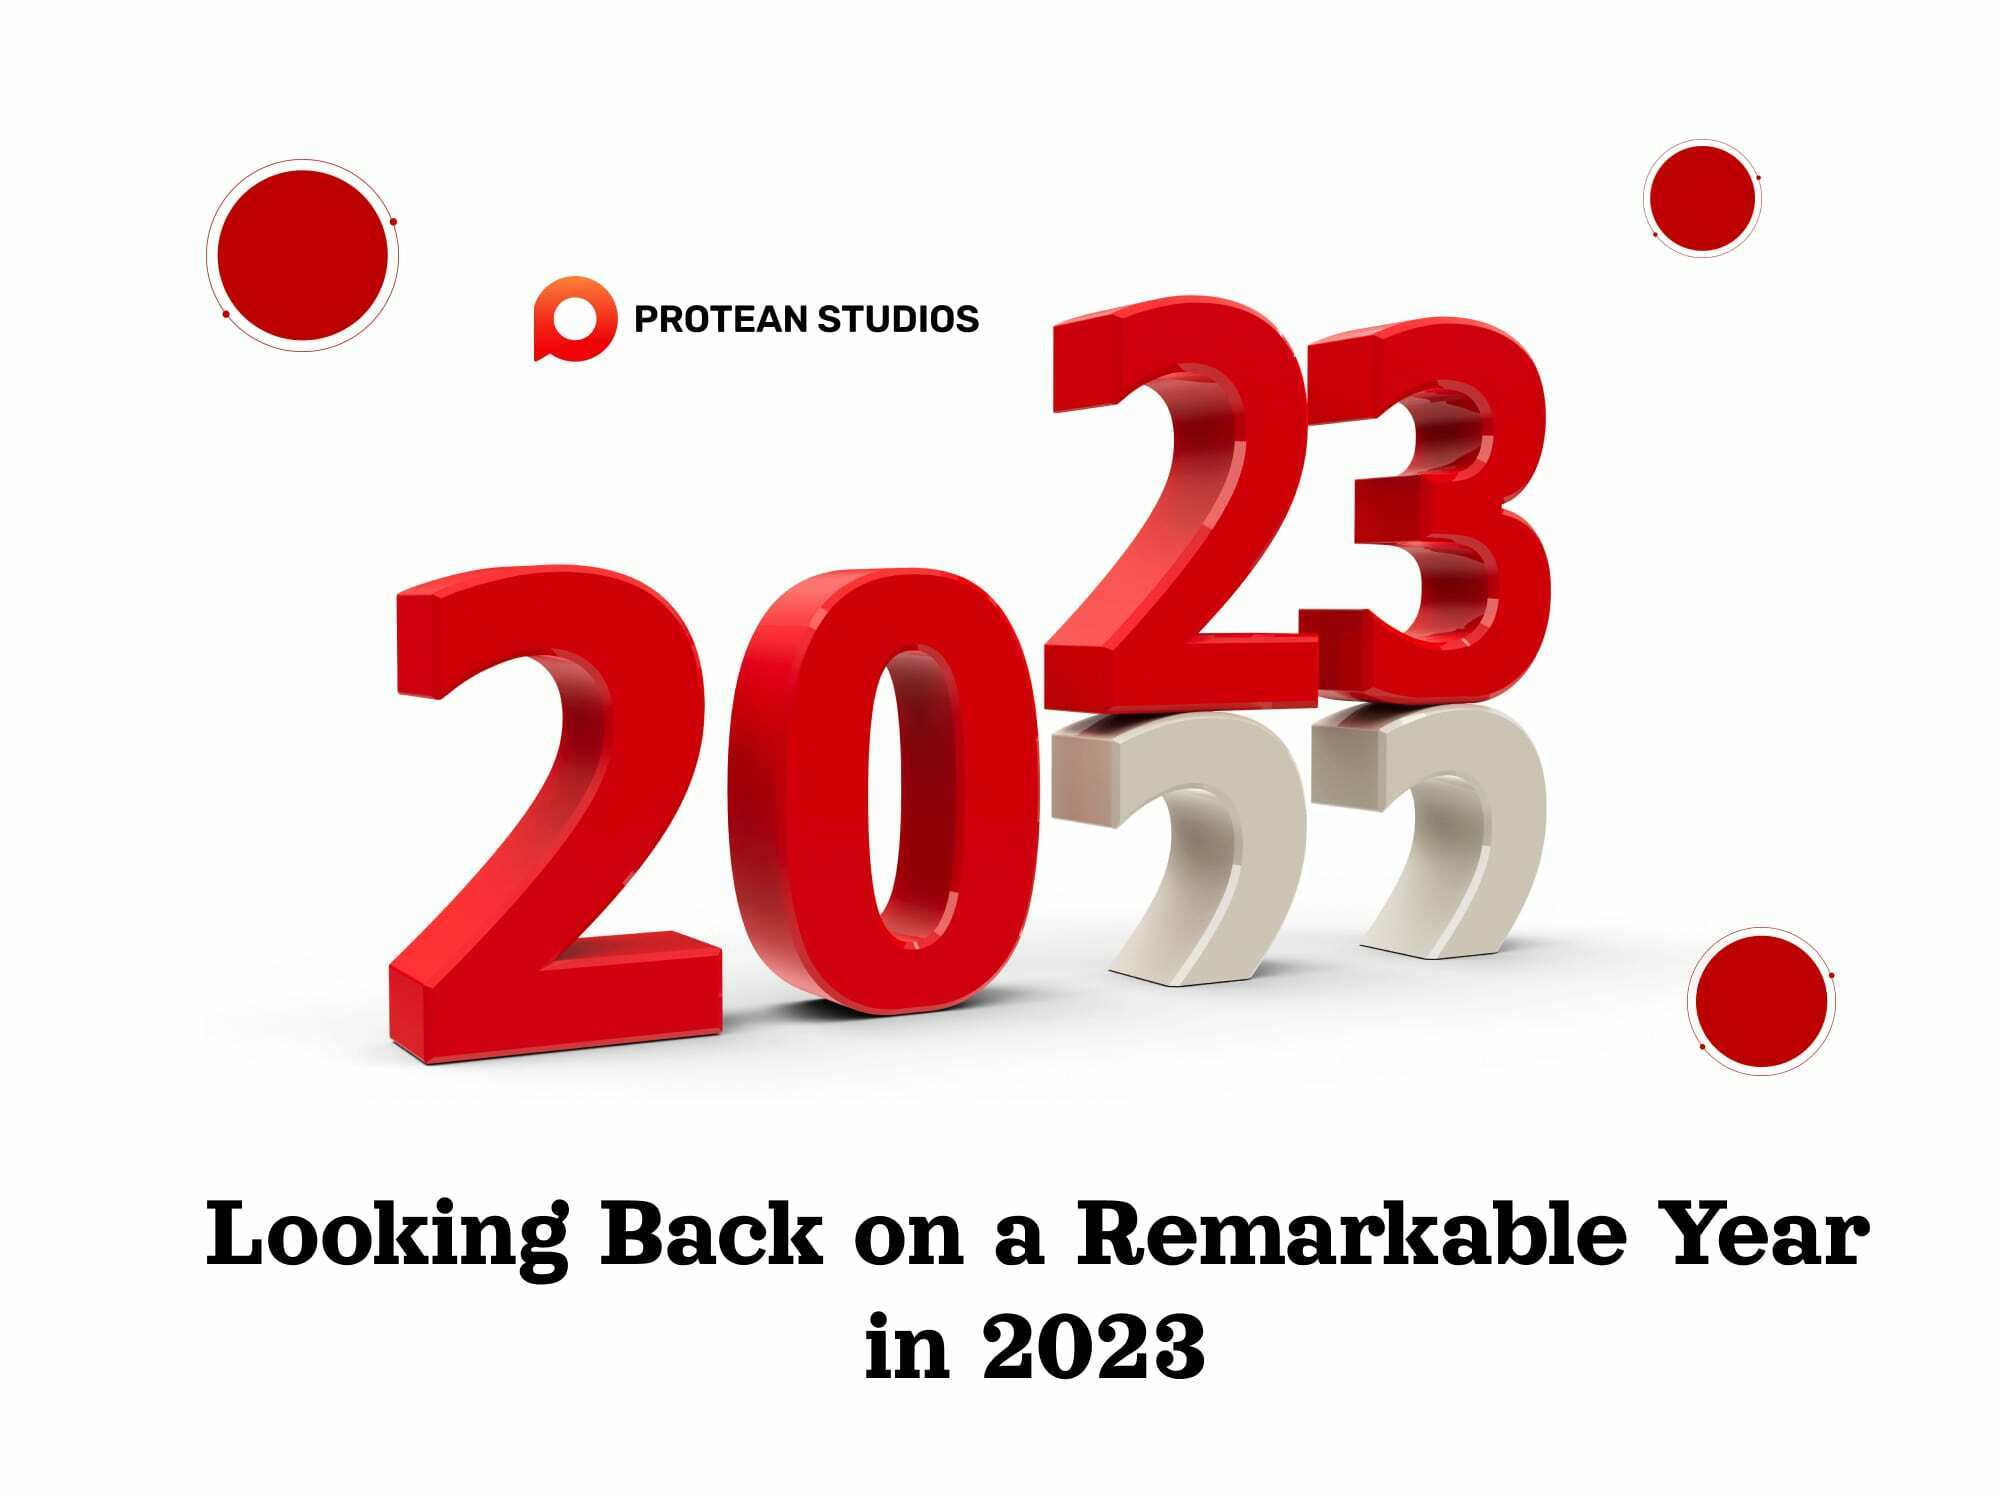 Protean Studios: Looking back on a remarkable year in 2023